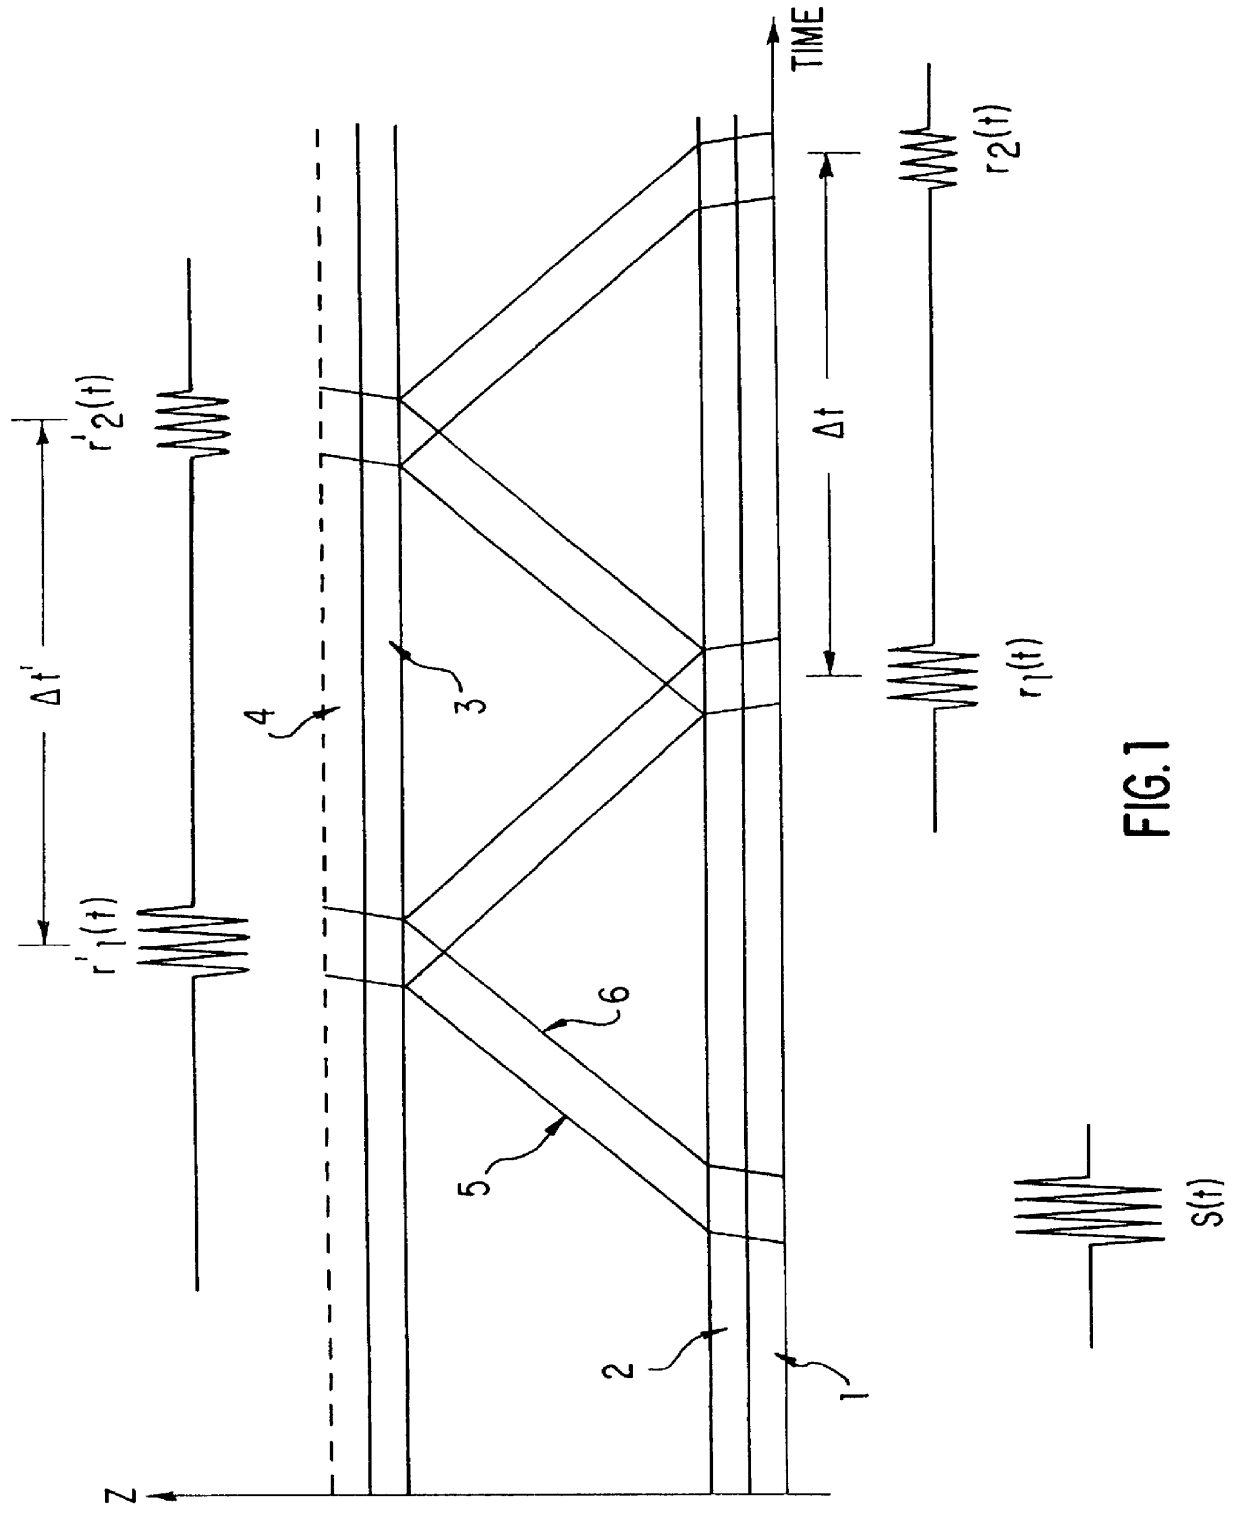 Apparatus and methods for performing acoustical measurements